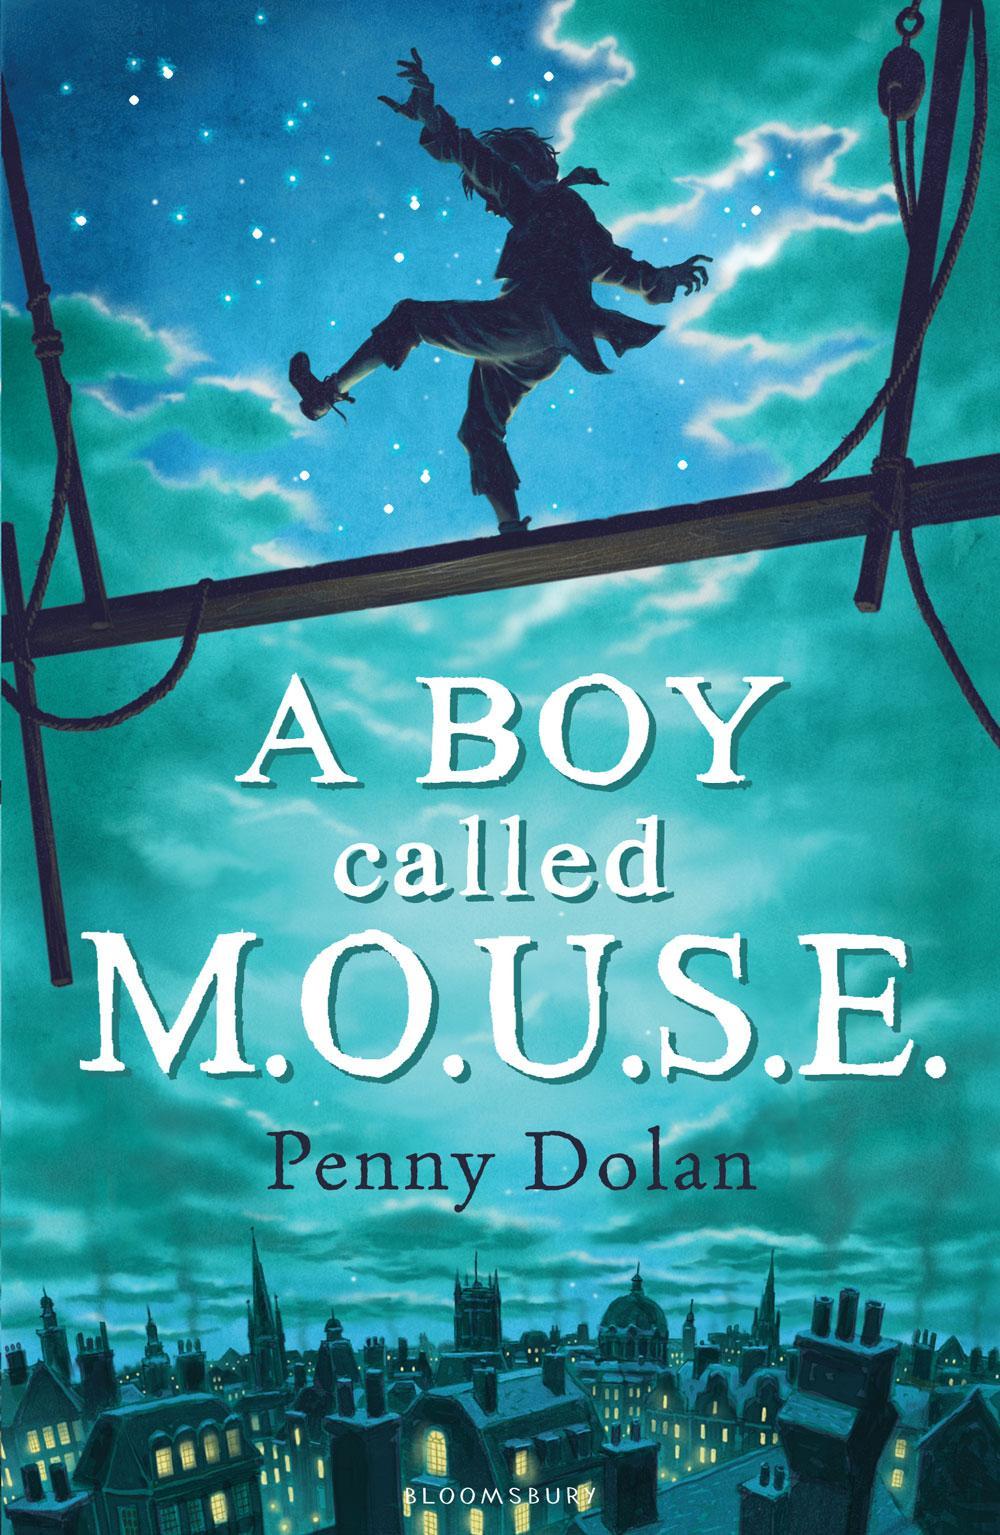 Boy Called MOUSE